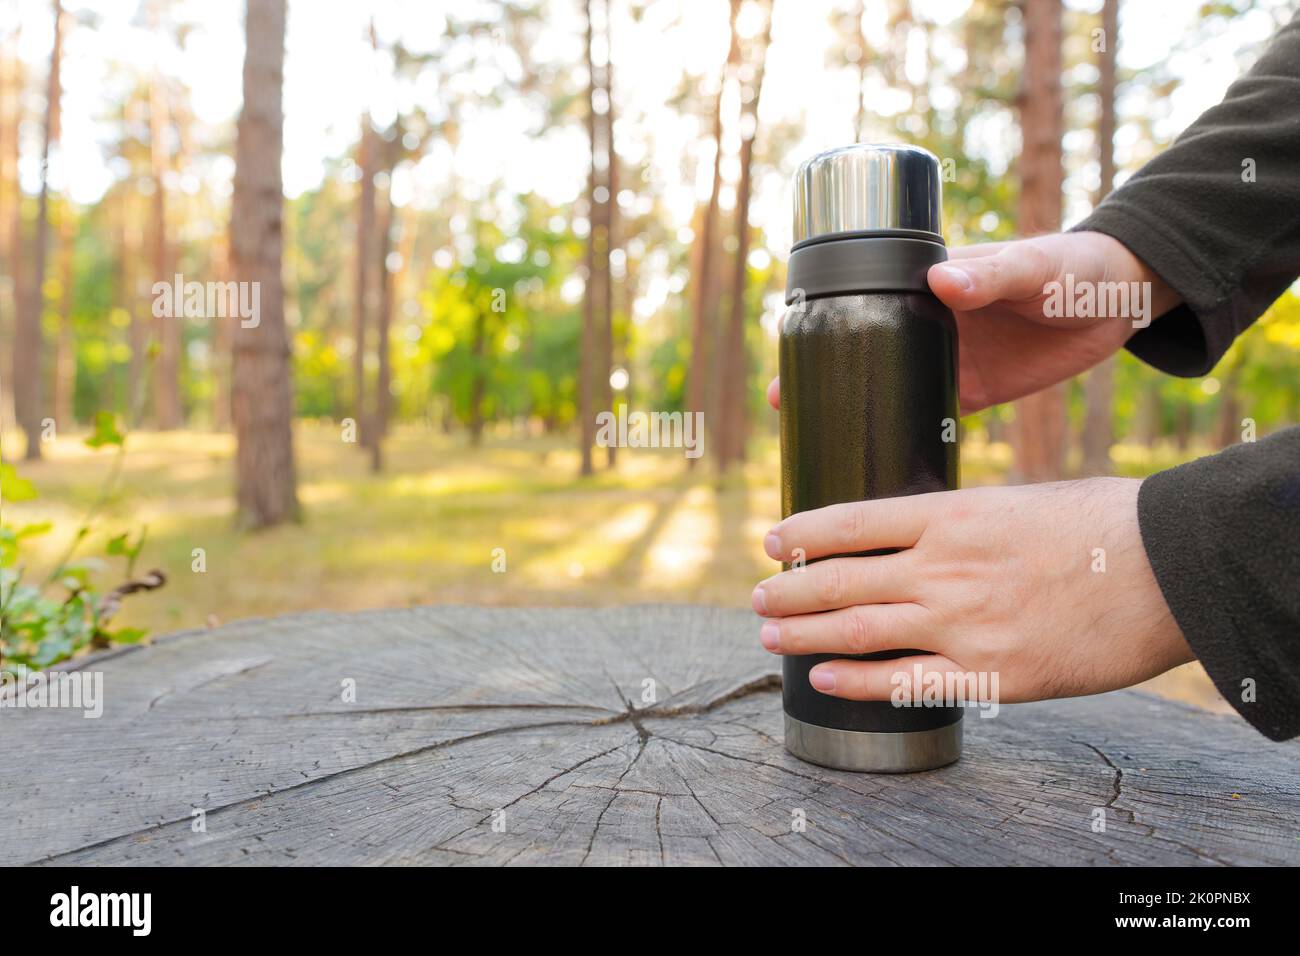 Black thermos bottle in male hands on a large tree stump with a forest background. Having a coffee break in the woods. Stock Photo